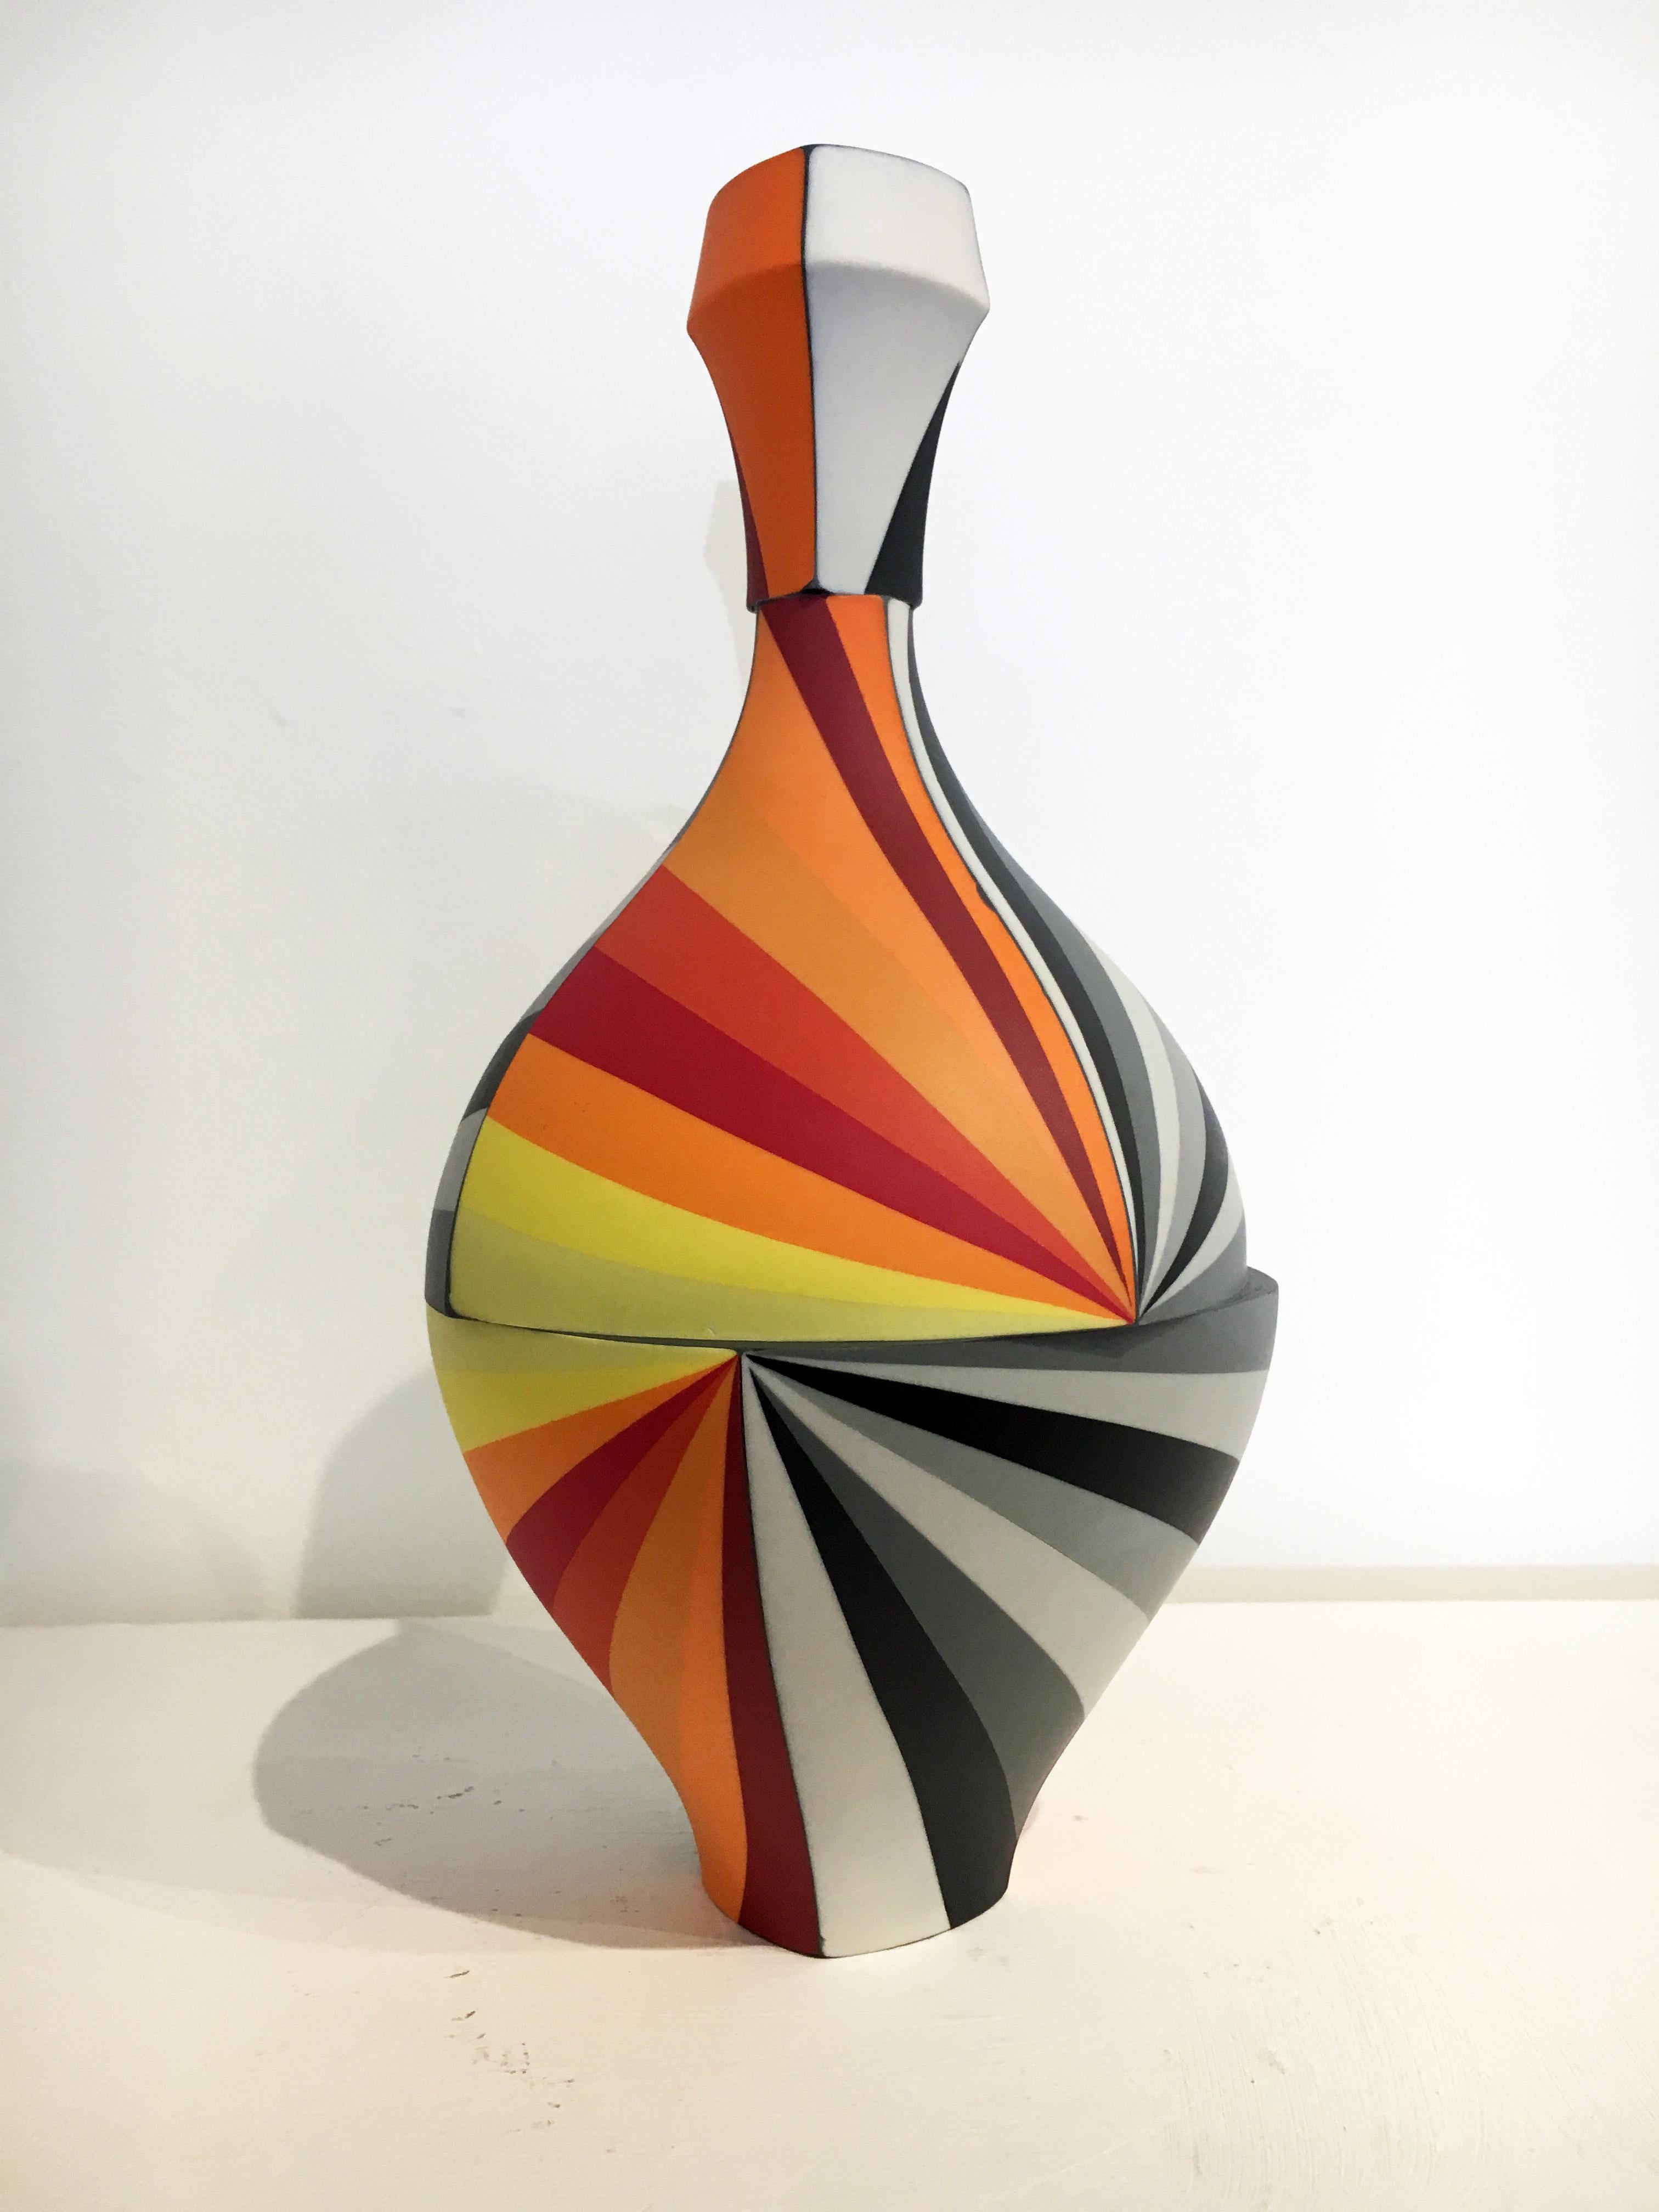 	Born in Rochester, NY, Peter Pincus is a ceramic artist and instructor. Peter received his BFA (2005) and MFA (2011) in ceramics from Alfred University, and in between was a resident artist at the Mendocino Art Center in Mendocino, California.